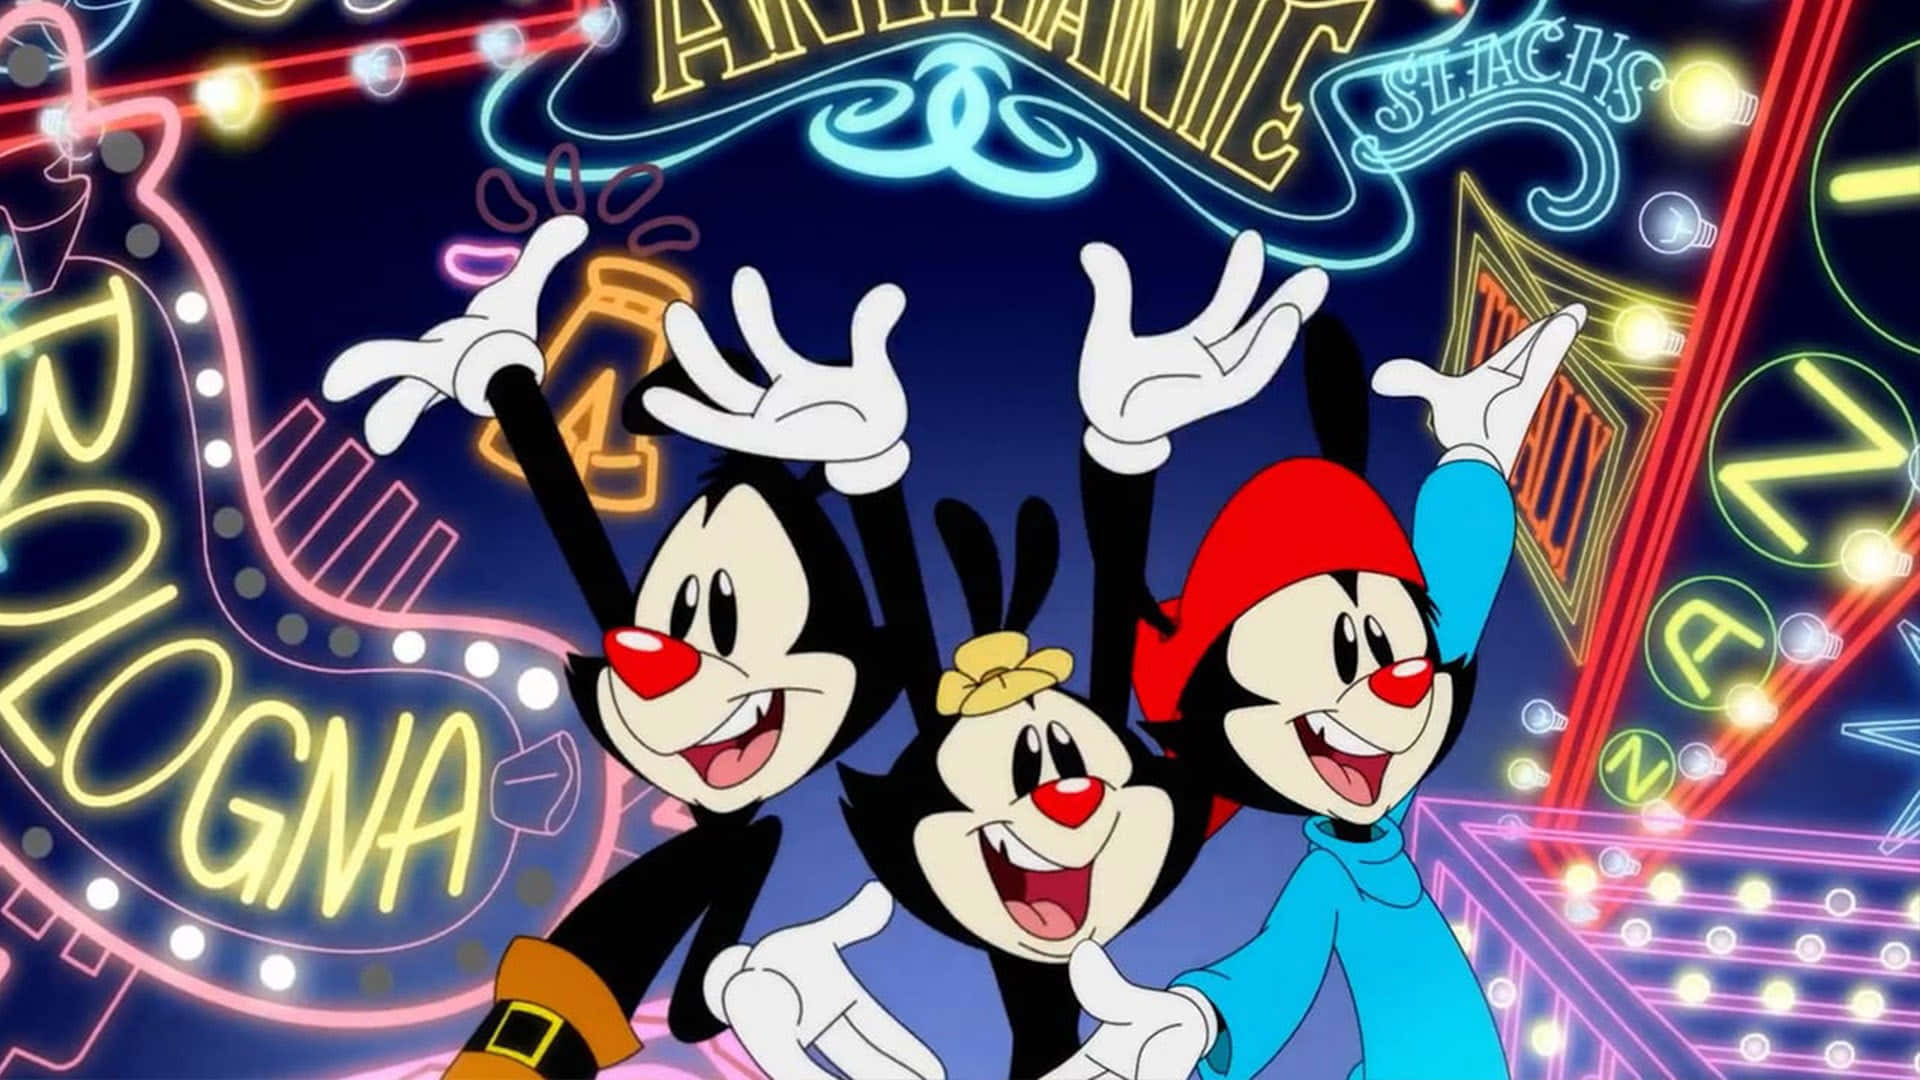 Wakko, Yakko, and Dot are excited to share their antics and adventures with you!